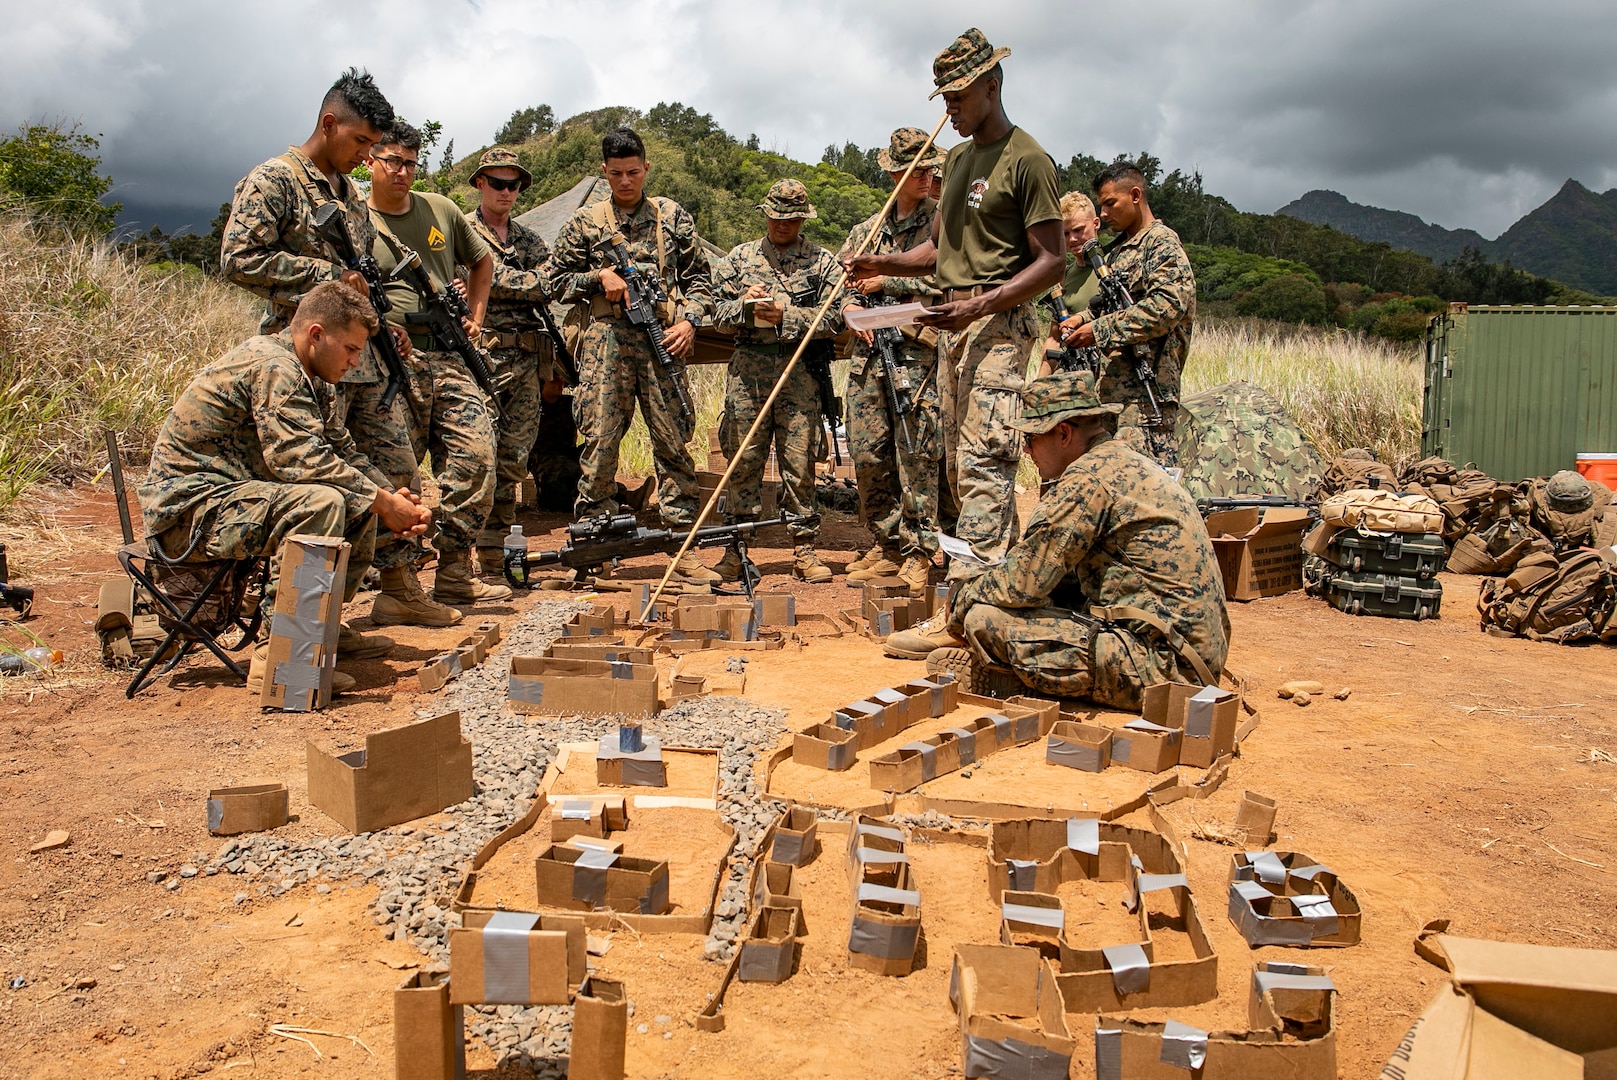 Marines with 2nd platoon, Combat Assault Company, 3rd Marine Regiment, plan their strategy before military operations in urban terrain training exercise, Marine Corps Training Area Bellows, June 19, 2019 (U.S. Marine Corps/Jose Angeles)